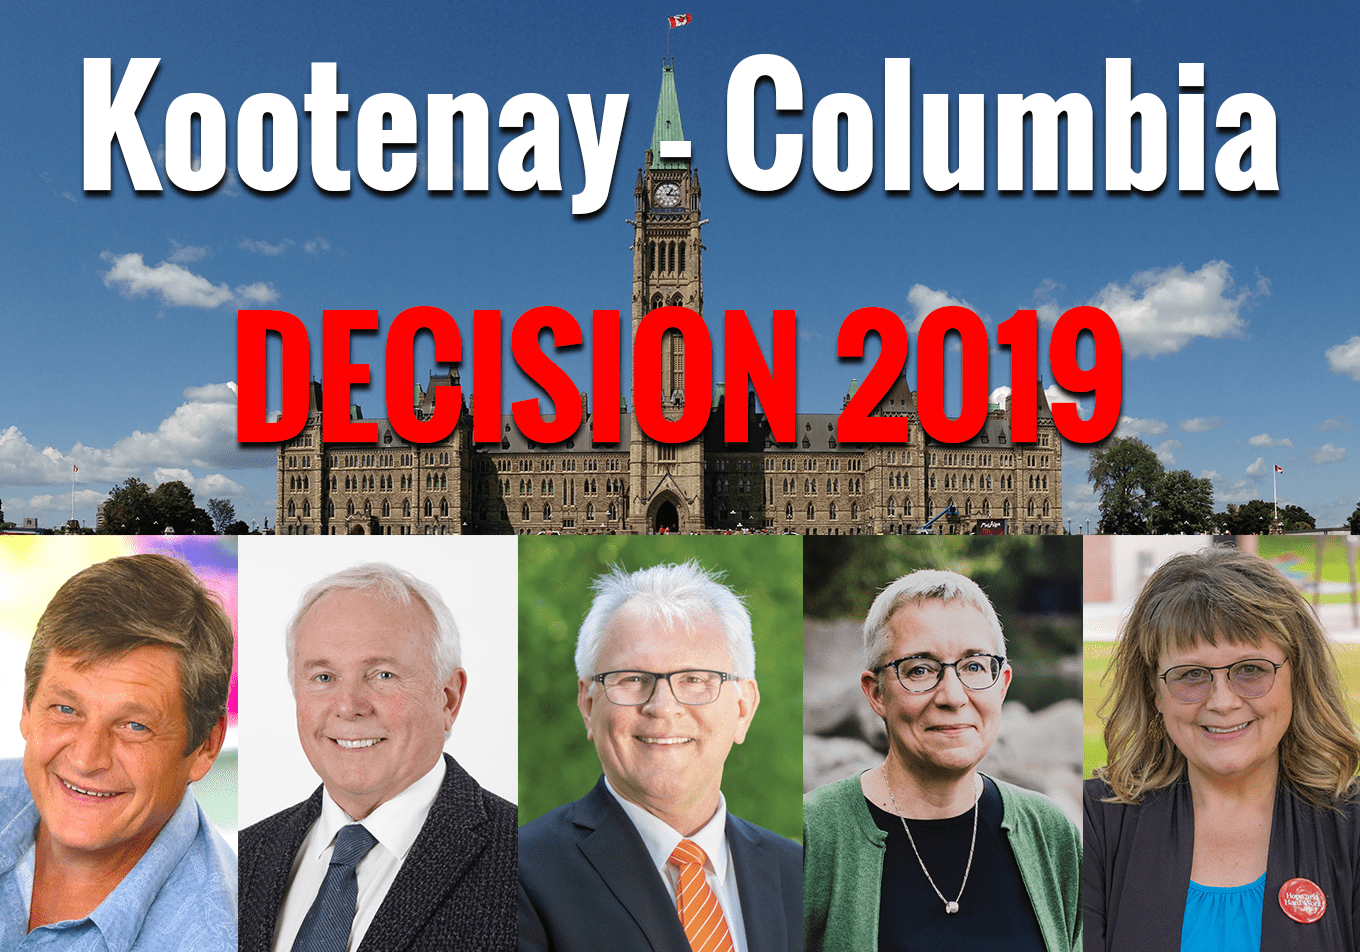 Question: Most important issue facing voters in Kootenay Columbia